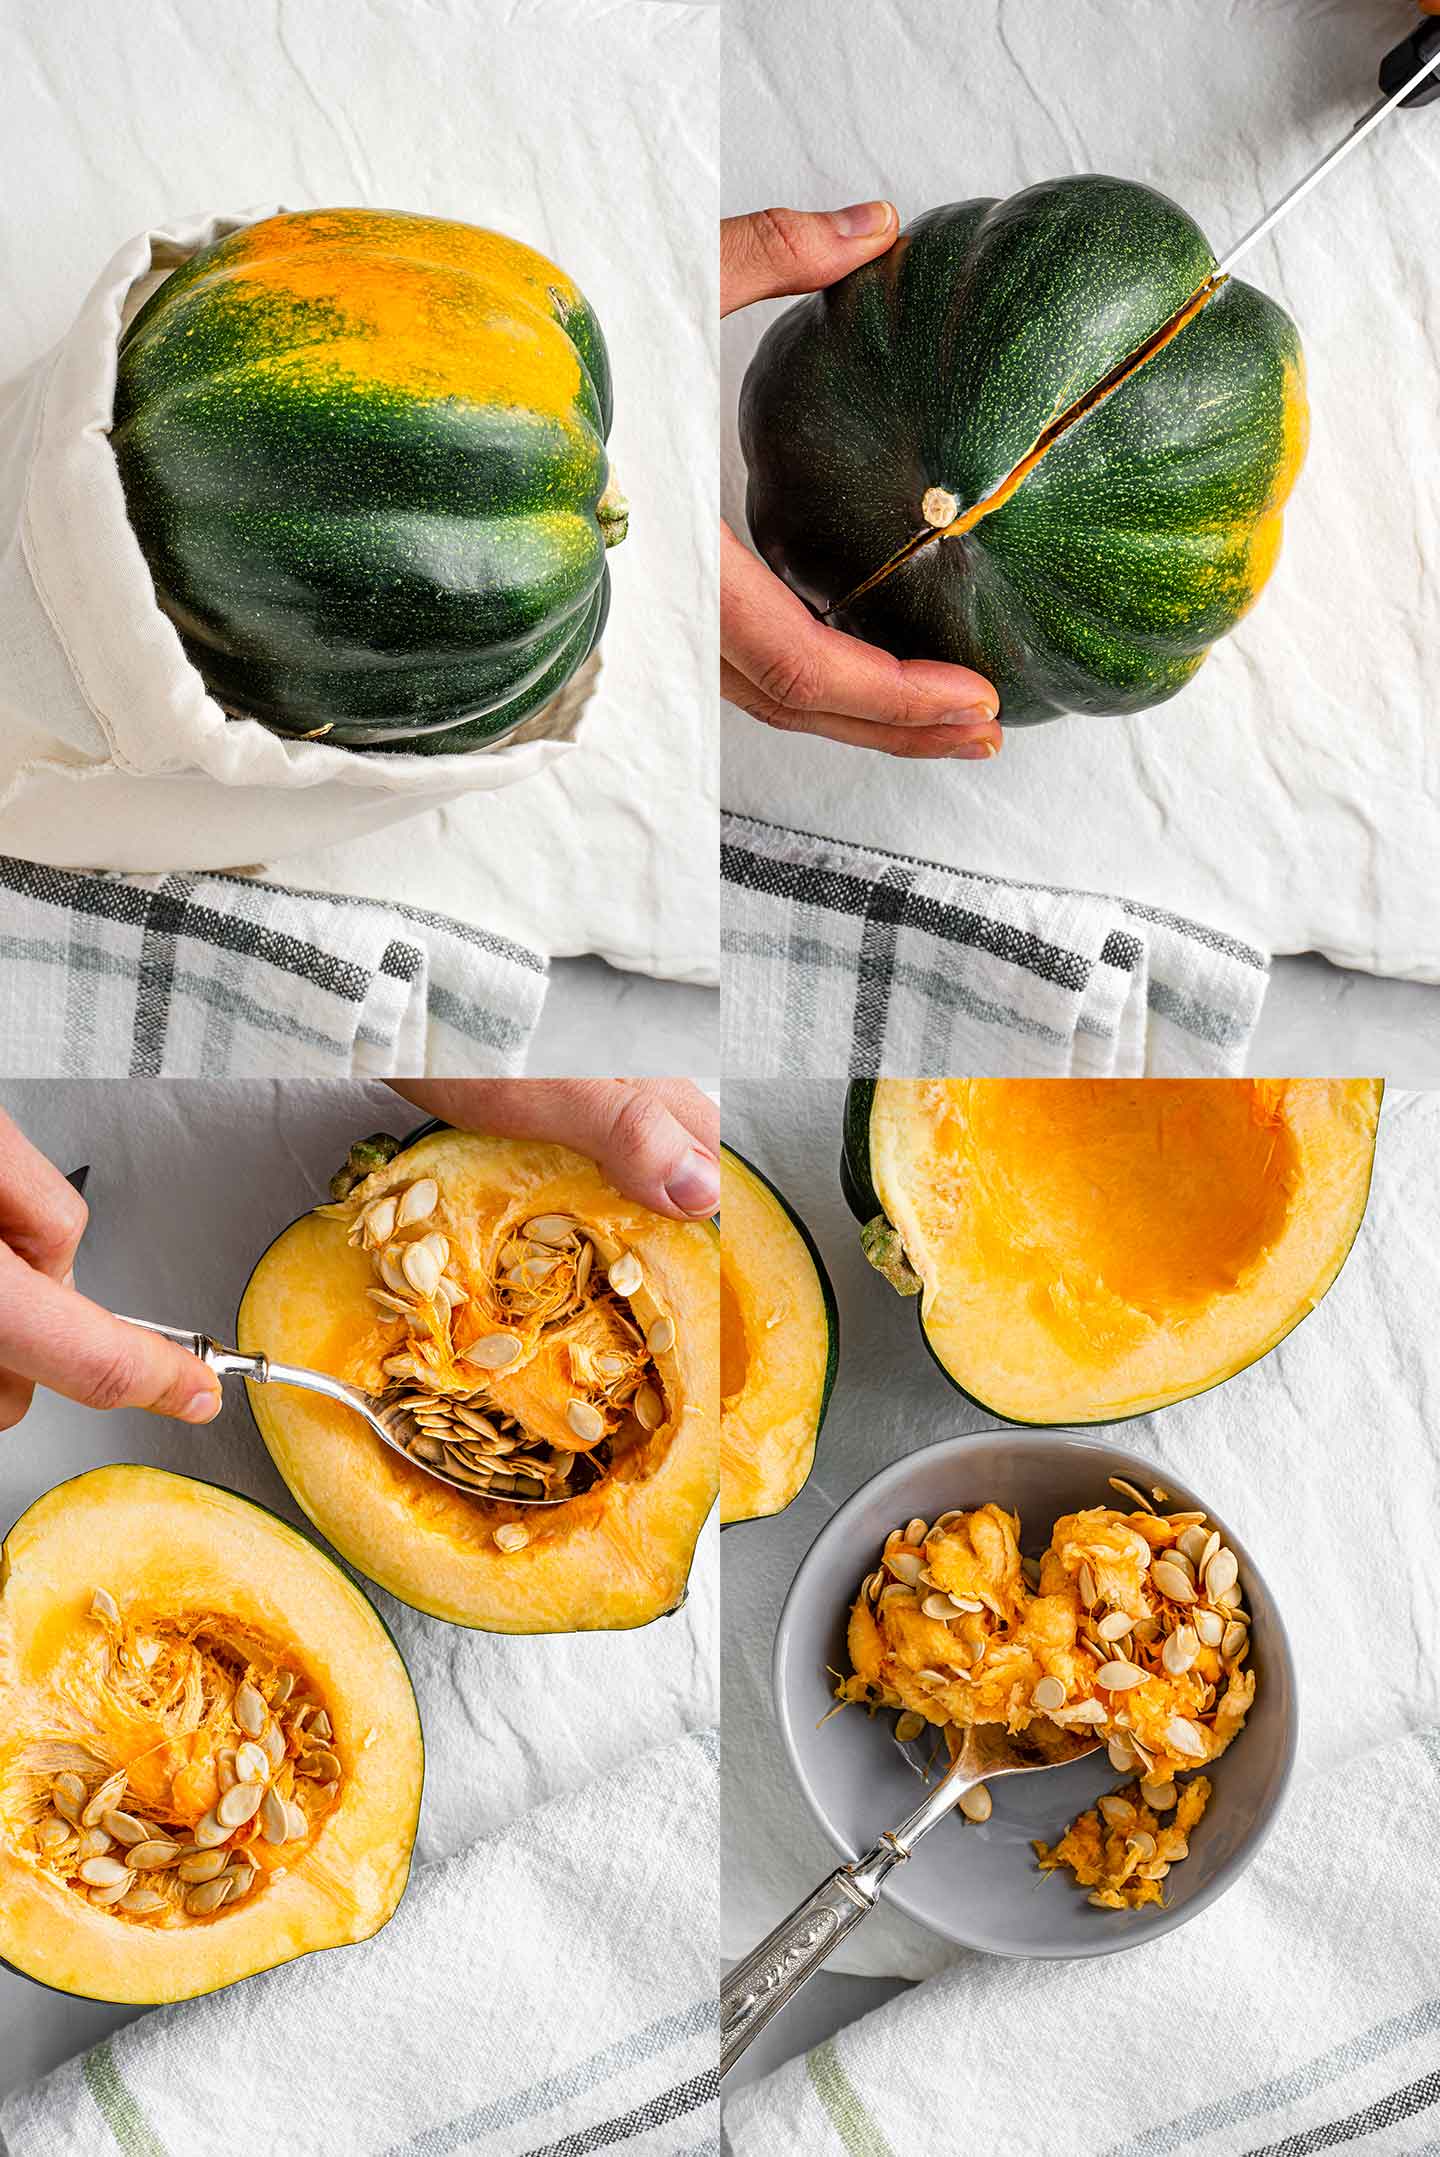 Top down grid of four process photos. A whole acorn squash, the squash being sliced in half, the seeds being removed and the hollowed out squash with seeds reserved in a small dish.